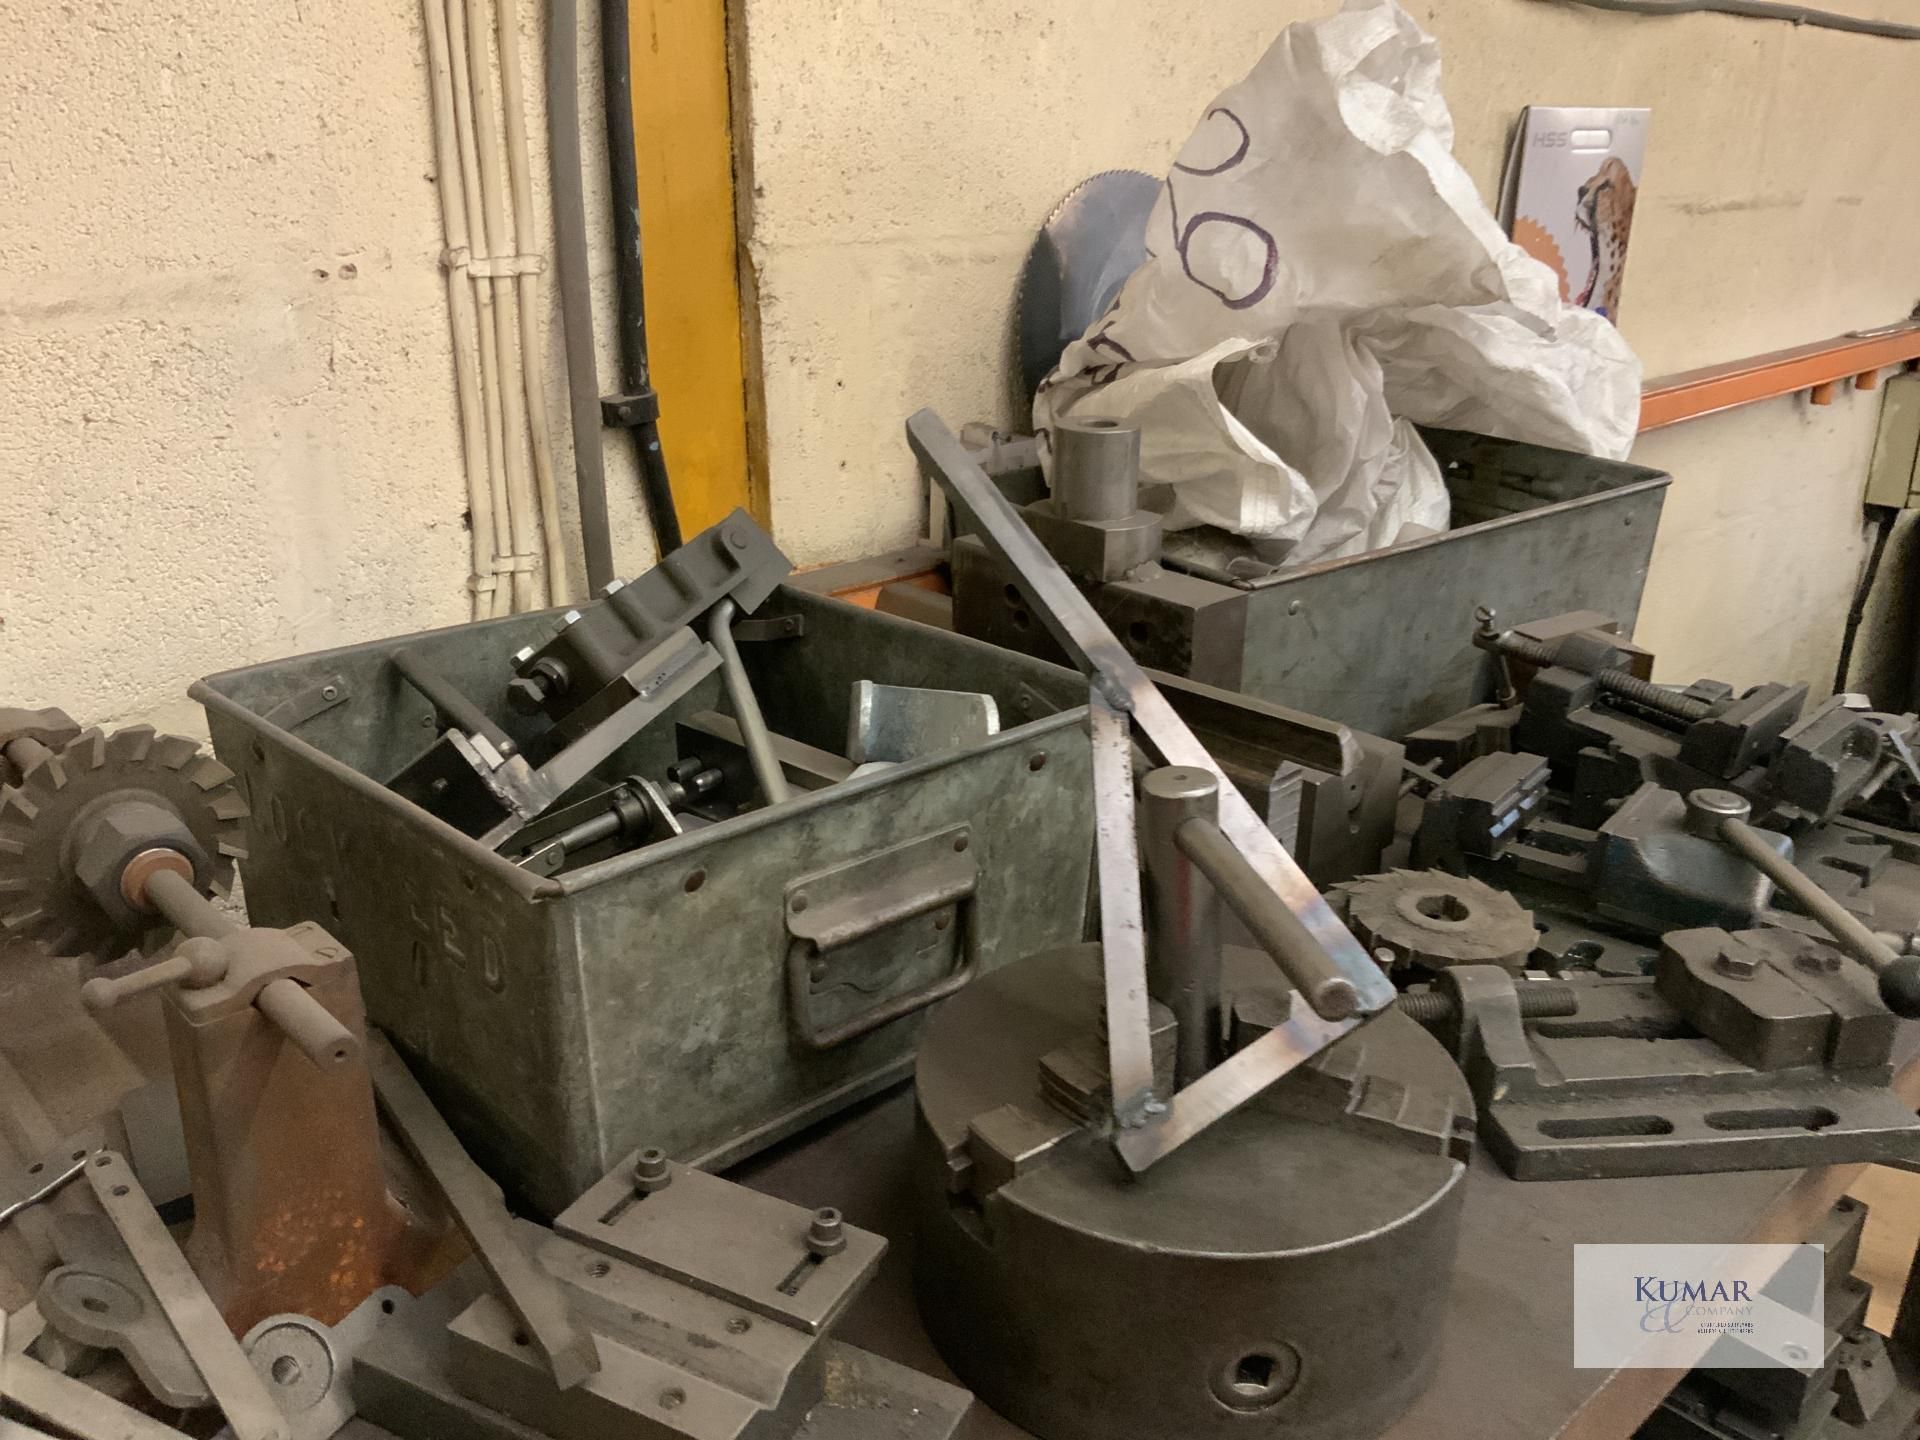 Machine tooling as imaged -  Collection Day – Tuesday 27th February Unit 4 Goscote Industrial - Image 4 of 9